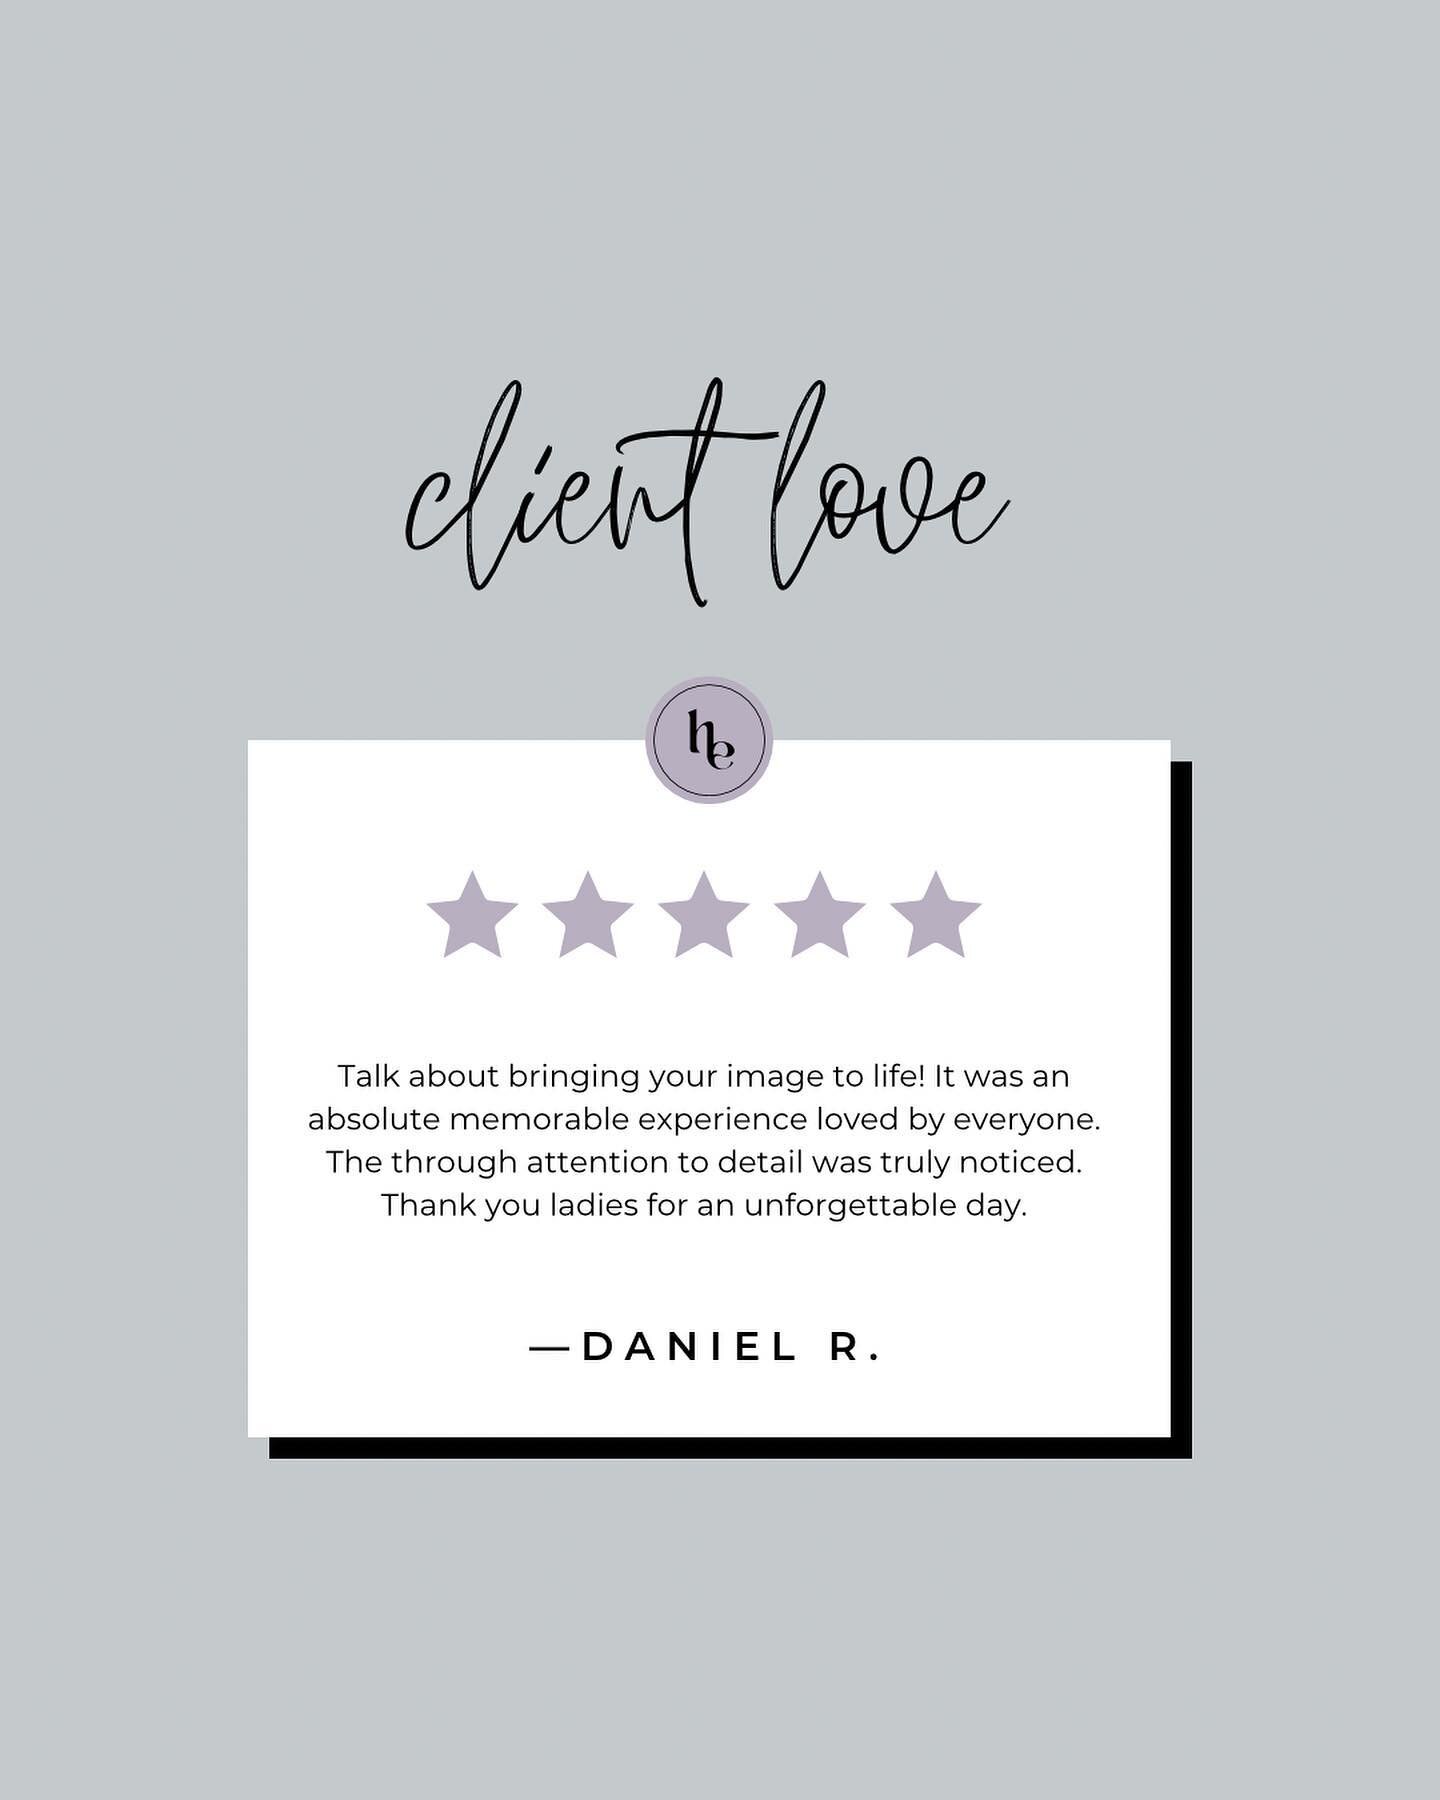 It&rsquo;s the attention to detail for us ✨

#babyshower #clientreview #clientlove #happyclient #eventplanners #rochesterny #kindwords #testimonial #clienttestimonial #testimonialtuesday